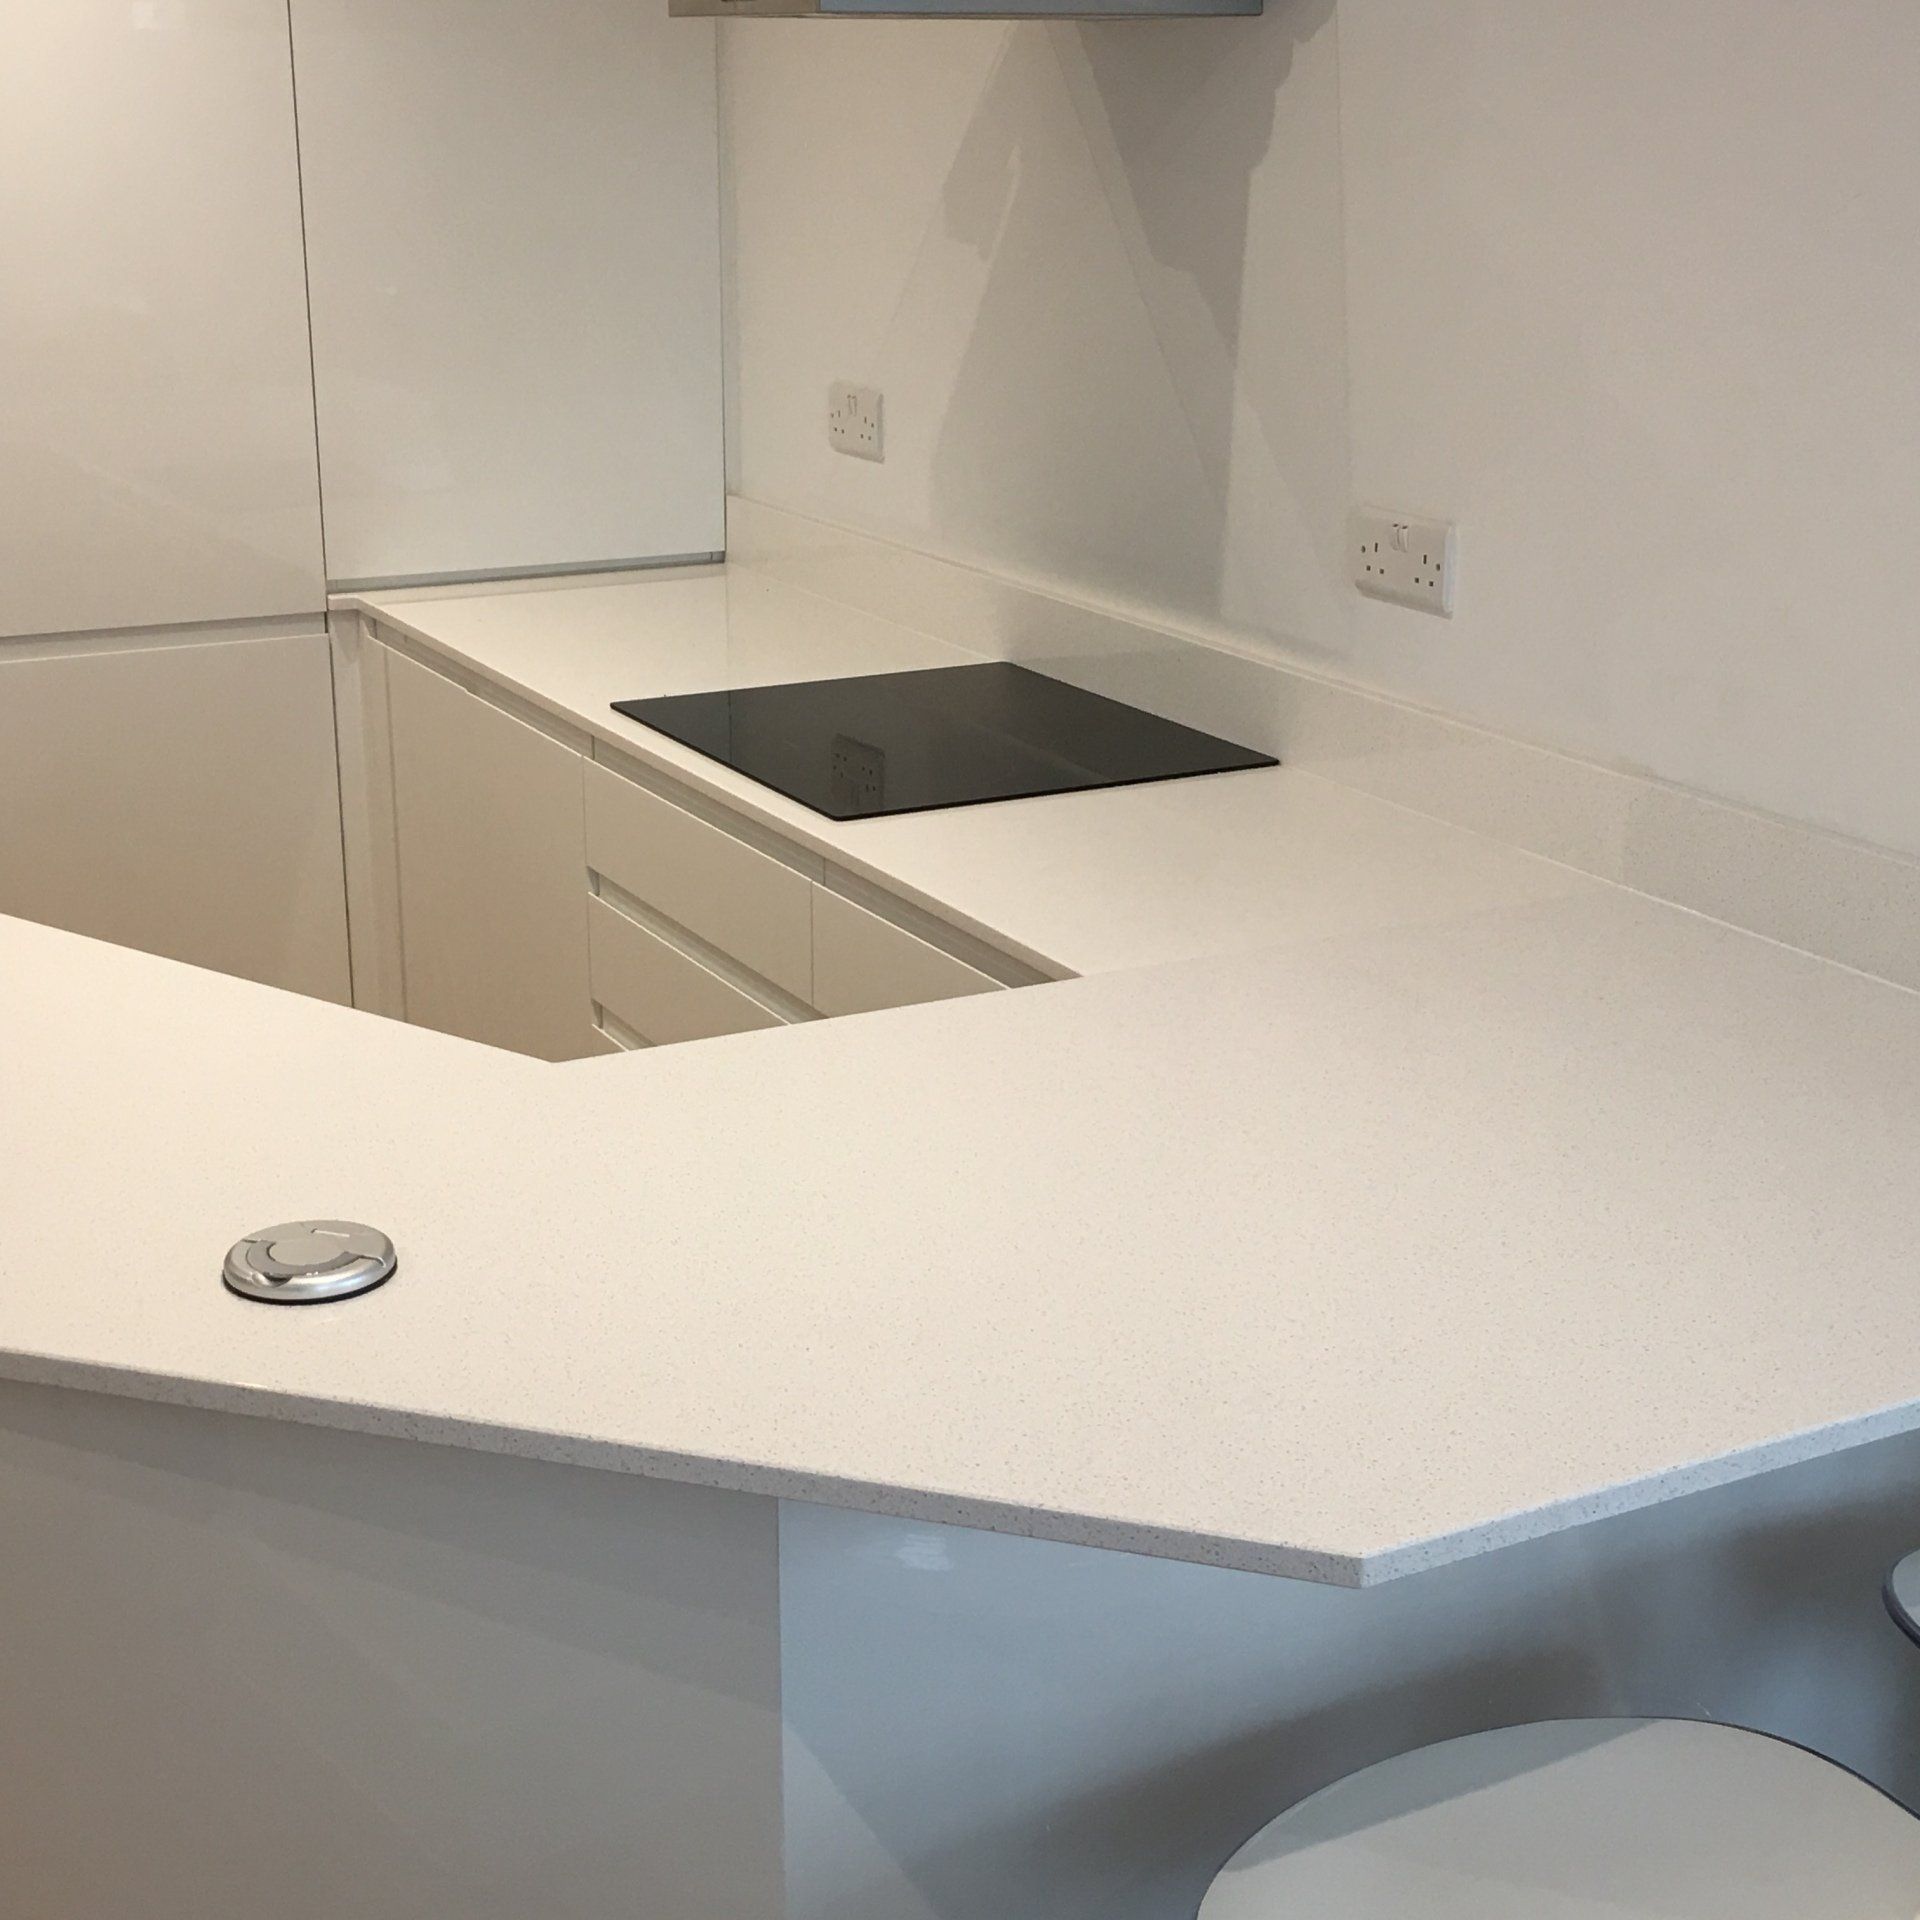 Kitchen fit, crawley down. Builder. Building contractor. Construction. Carpentry. Carpentry contractor. Extensions. New builds. Timber frame fabrication and erection. Design and build. Kitchen installations. Horsham. Surrey. Reigate. Redhill. Dorking. Crawley. West Sussex. Cranleigh.